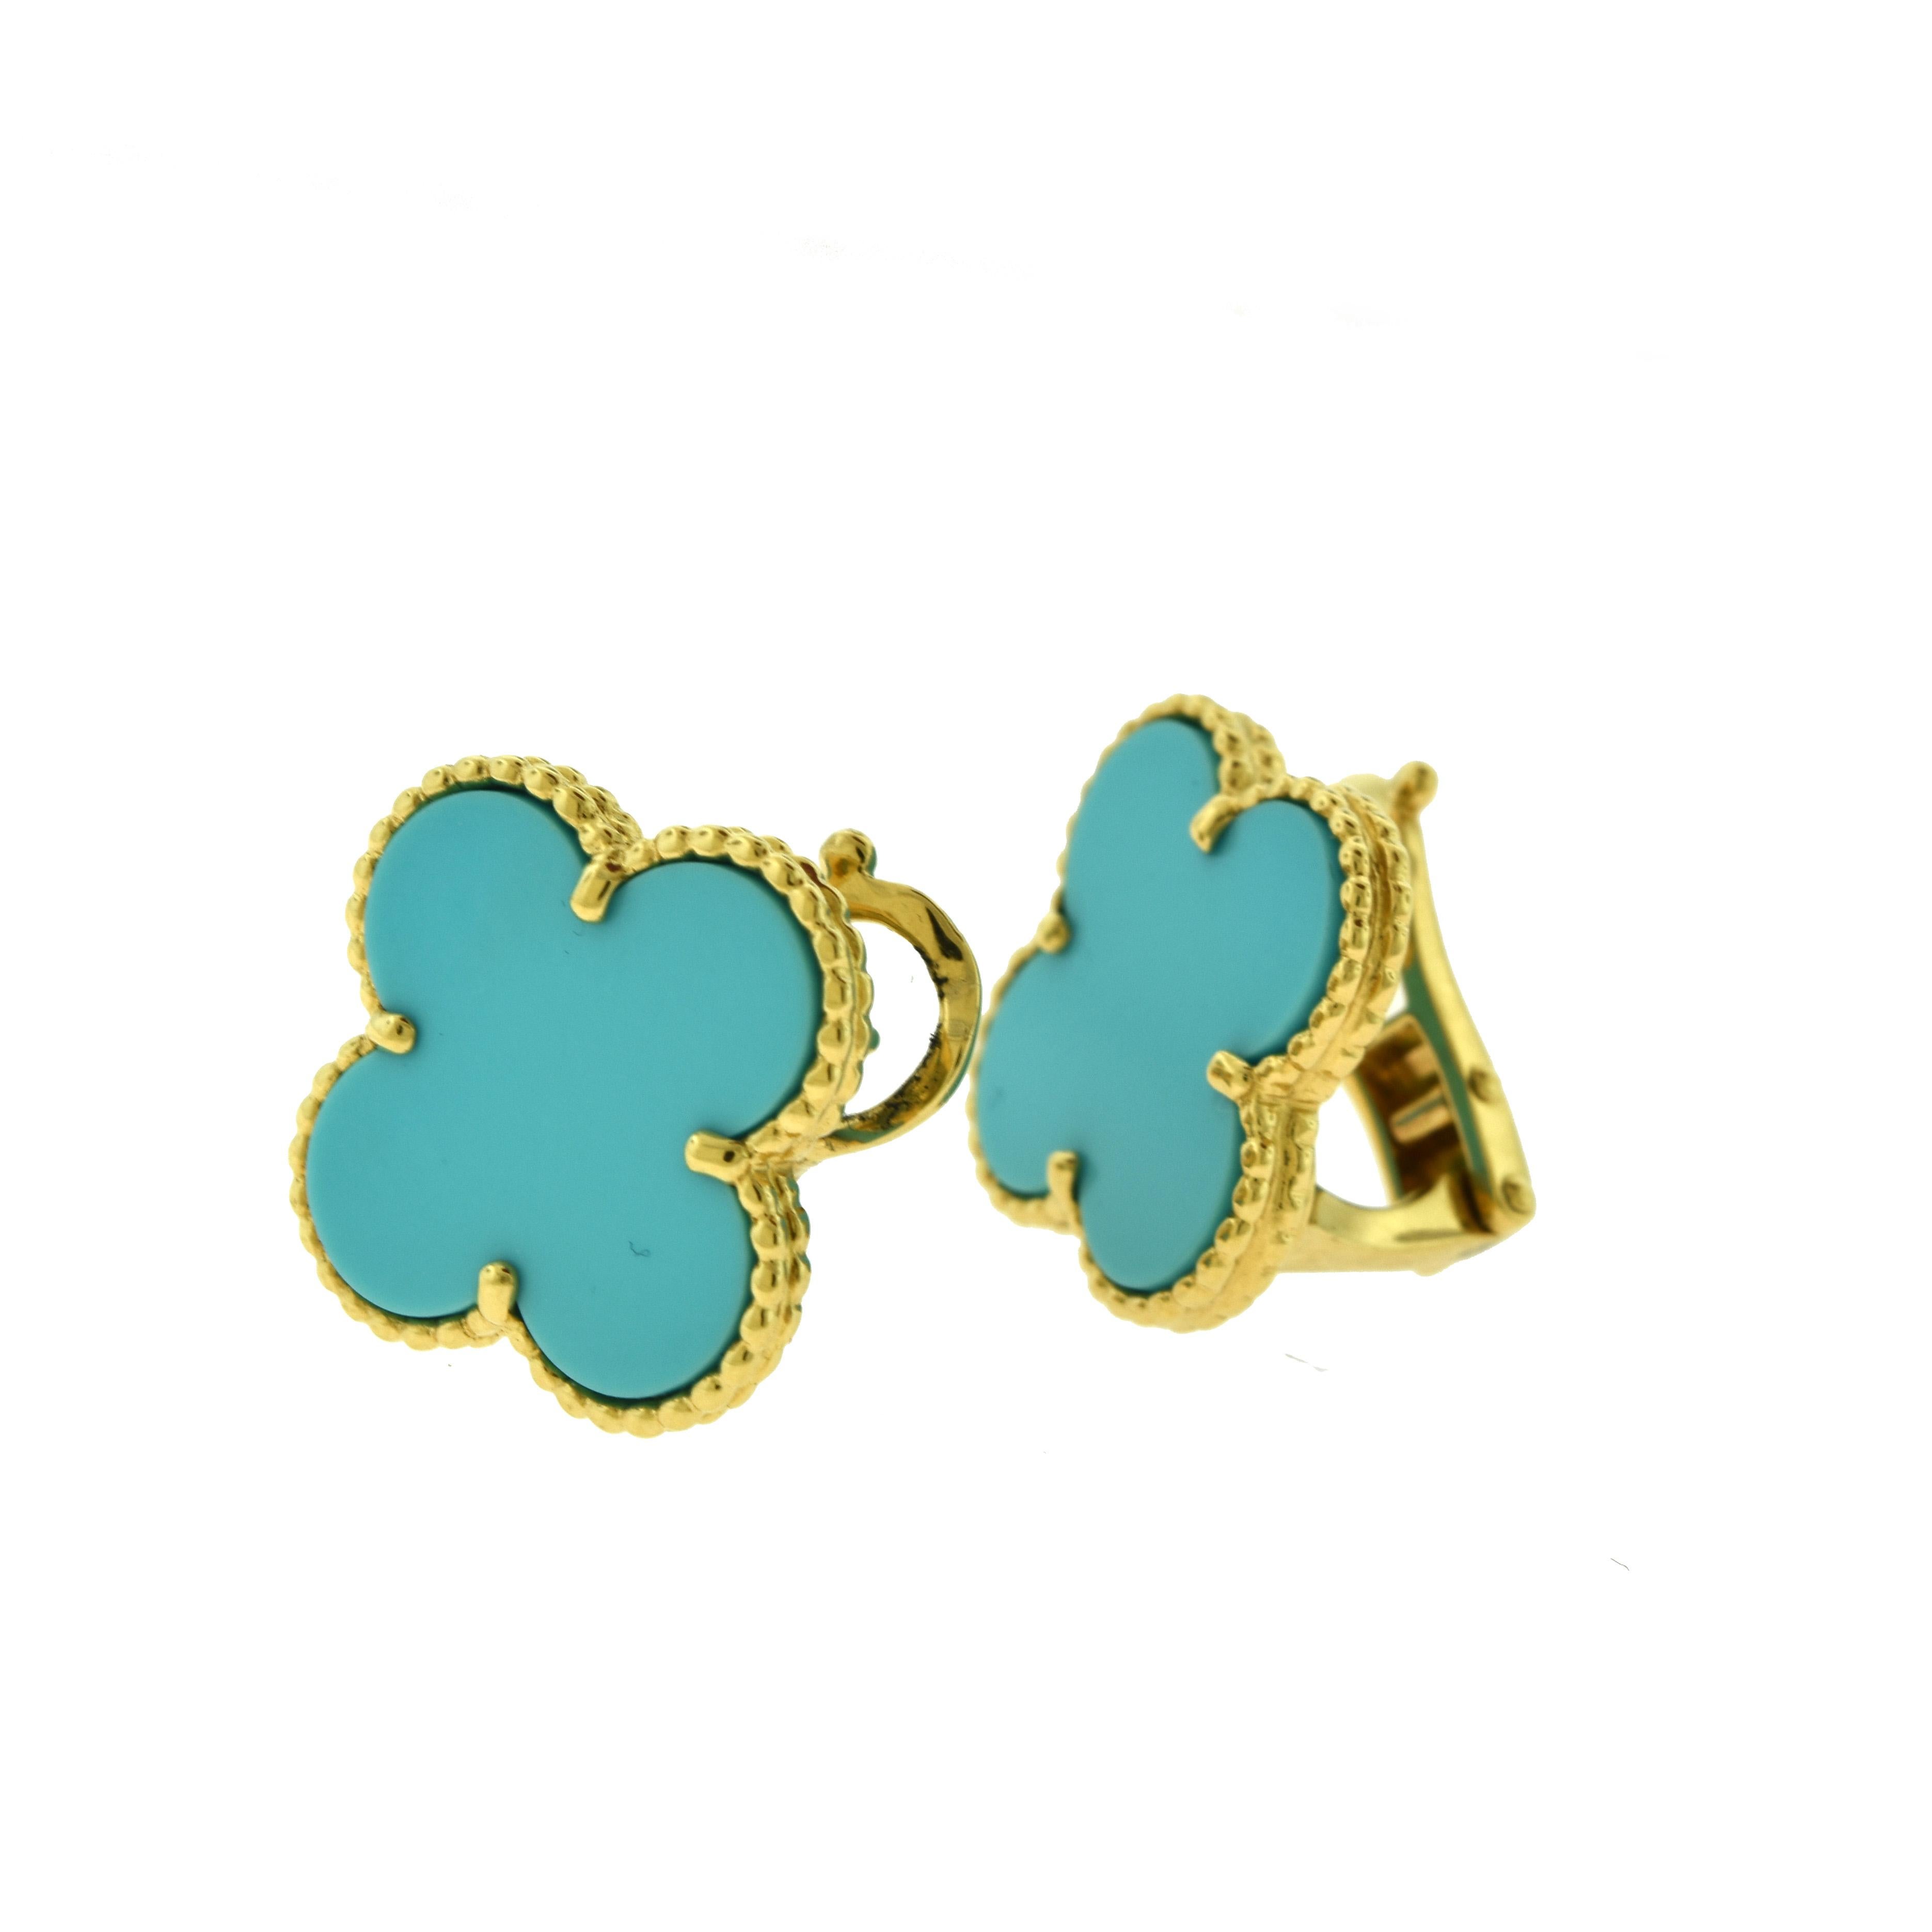 Designer: Van Cleef & Arpels

Collection: Magic Alhambra

Style: 1 Motif Studs

Stones: Turquoise Onyx 

Metal Type: Yellow Gold

Metal Purity: 18k

Total Item Weight (grams): 10.6

Earring Dimensions: 17.15 mm x 19.93 mm

Closure: Omega Post Backs